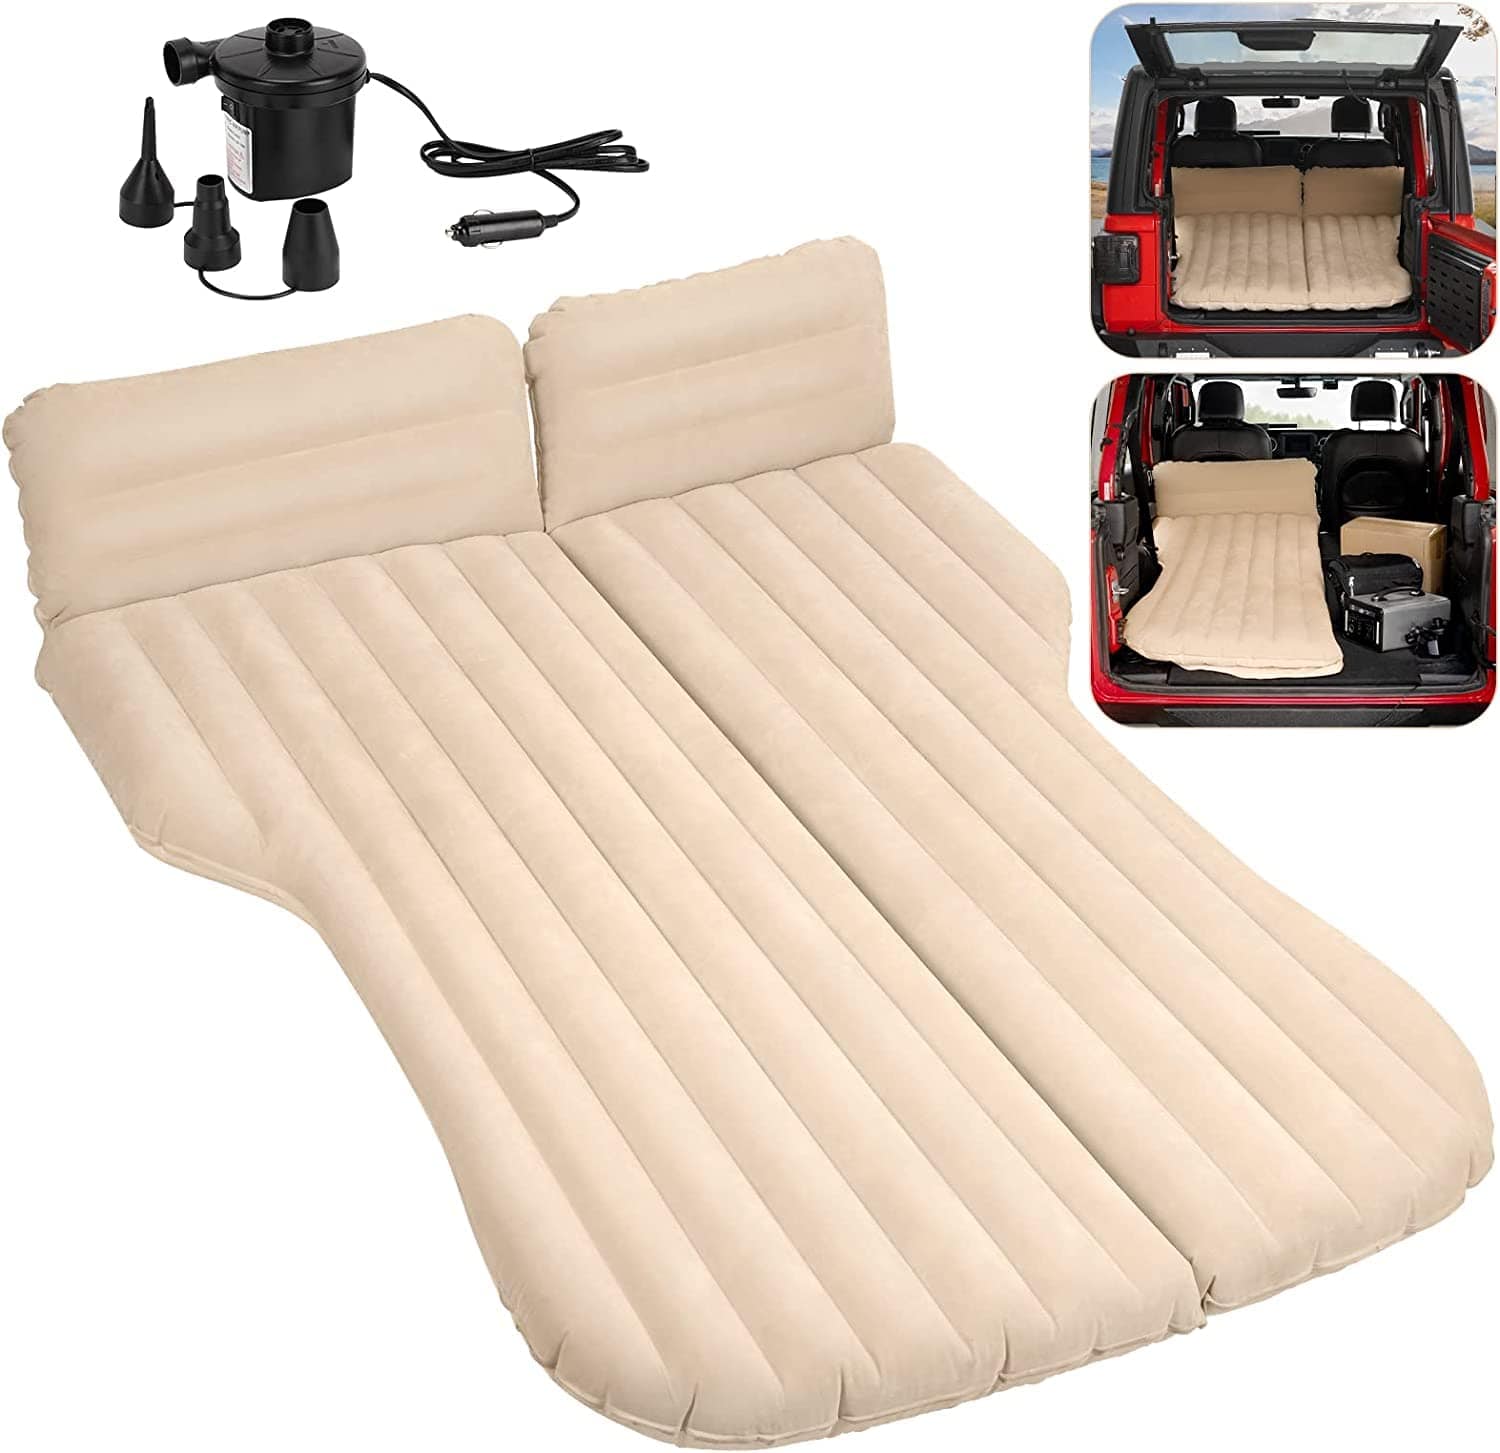 Jeep Wrangler special Air Mattress Car Bed for Jeep – SUPAREE